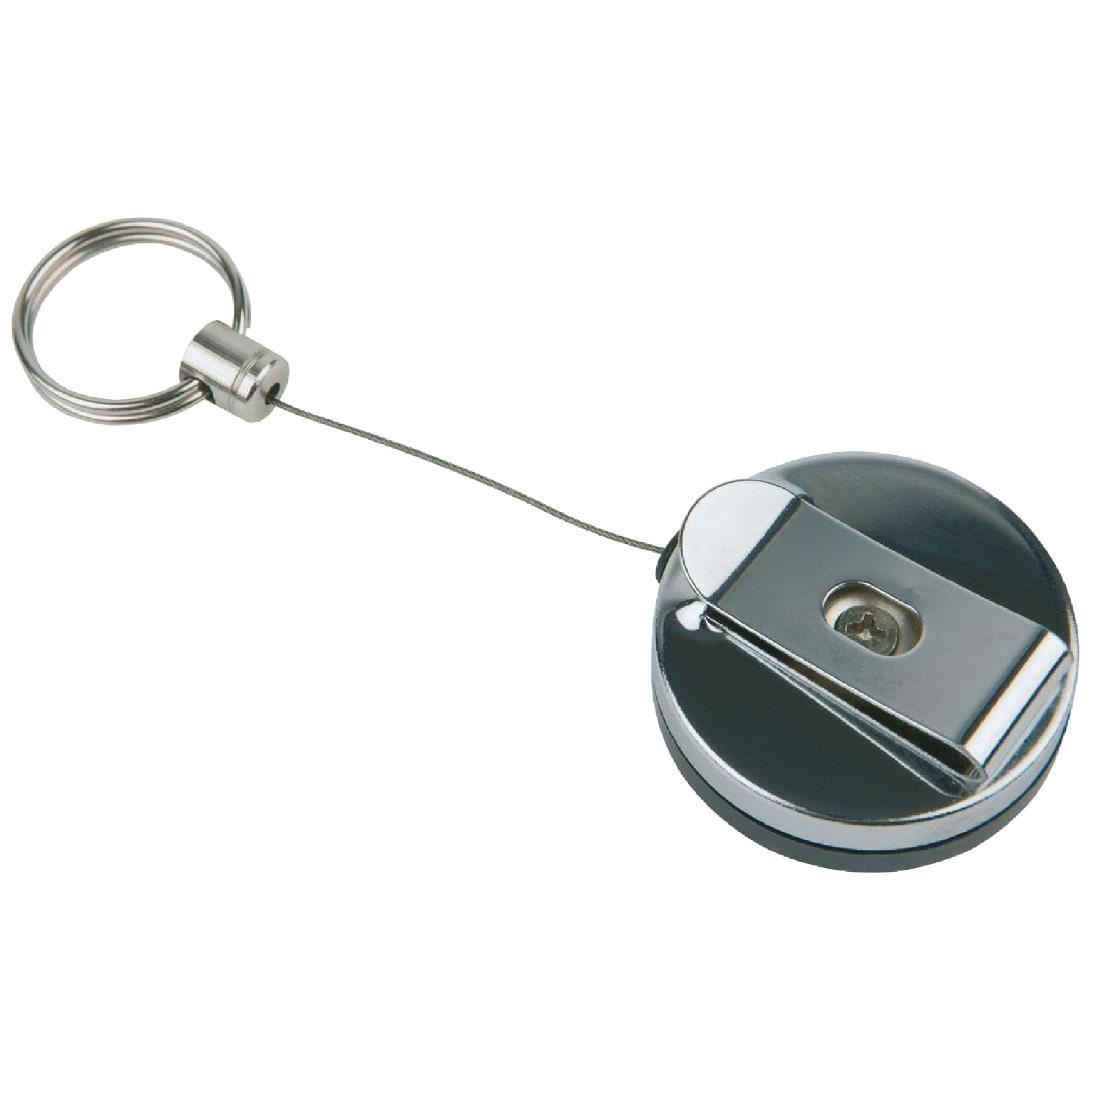 APS Retractable Key Chain (Pack of 2) - DP109  - 1